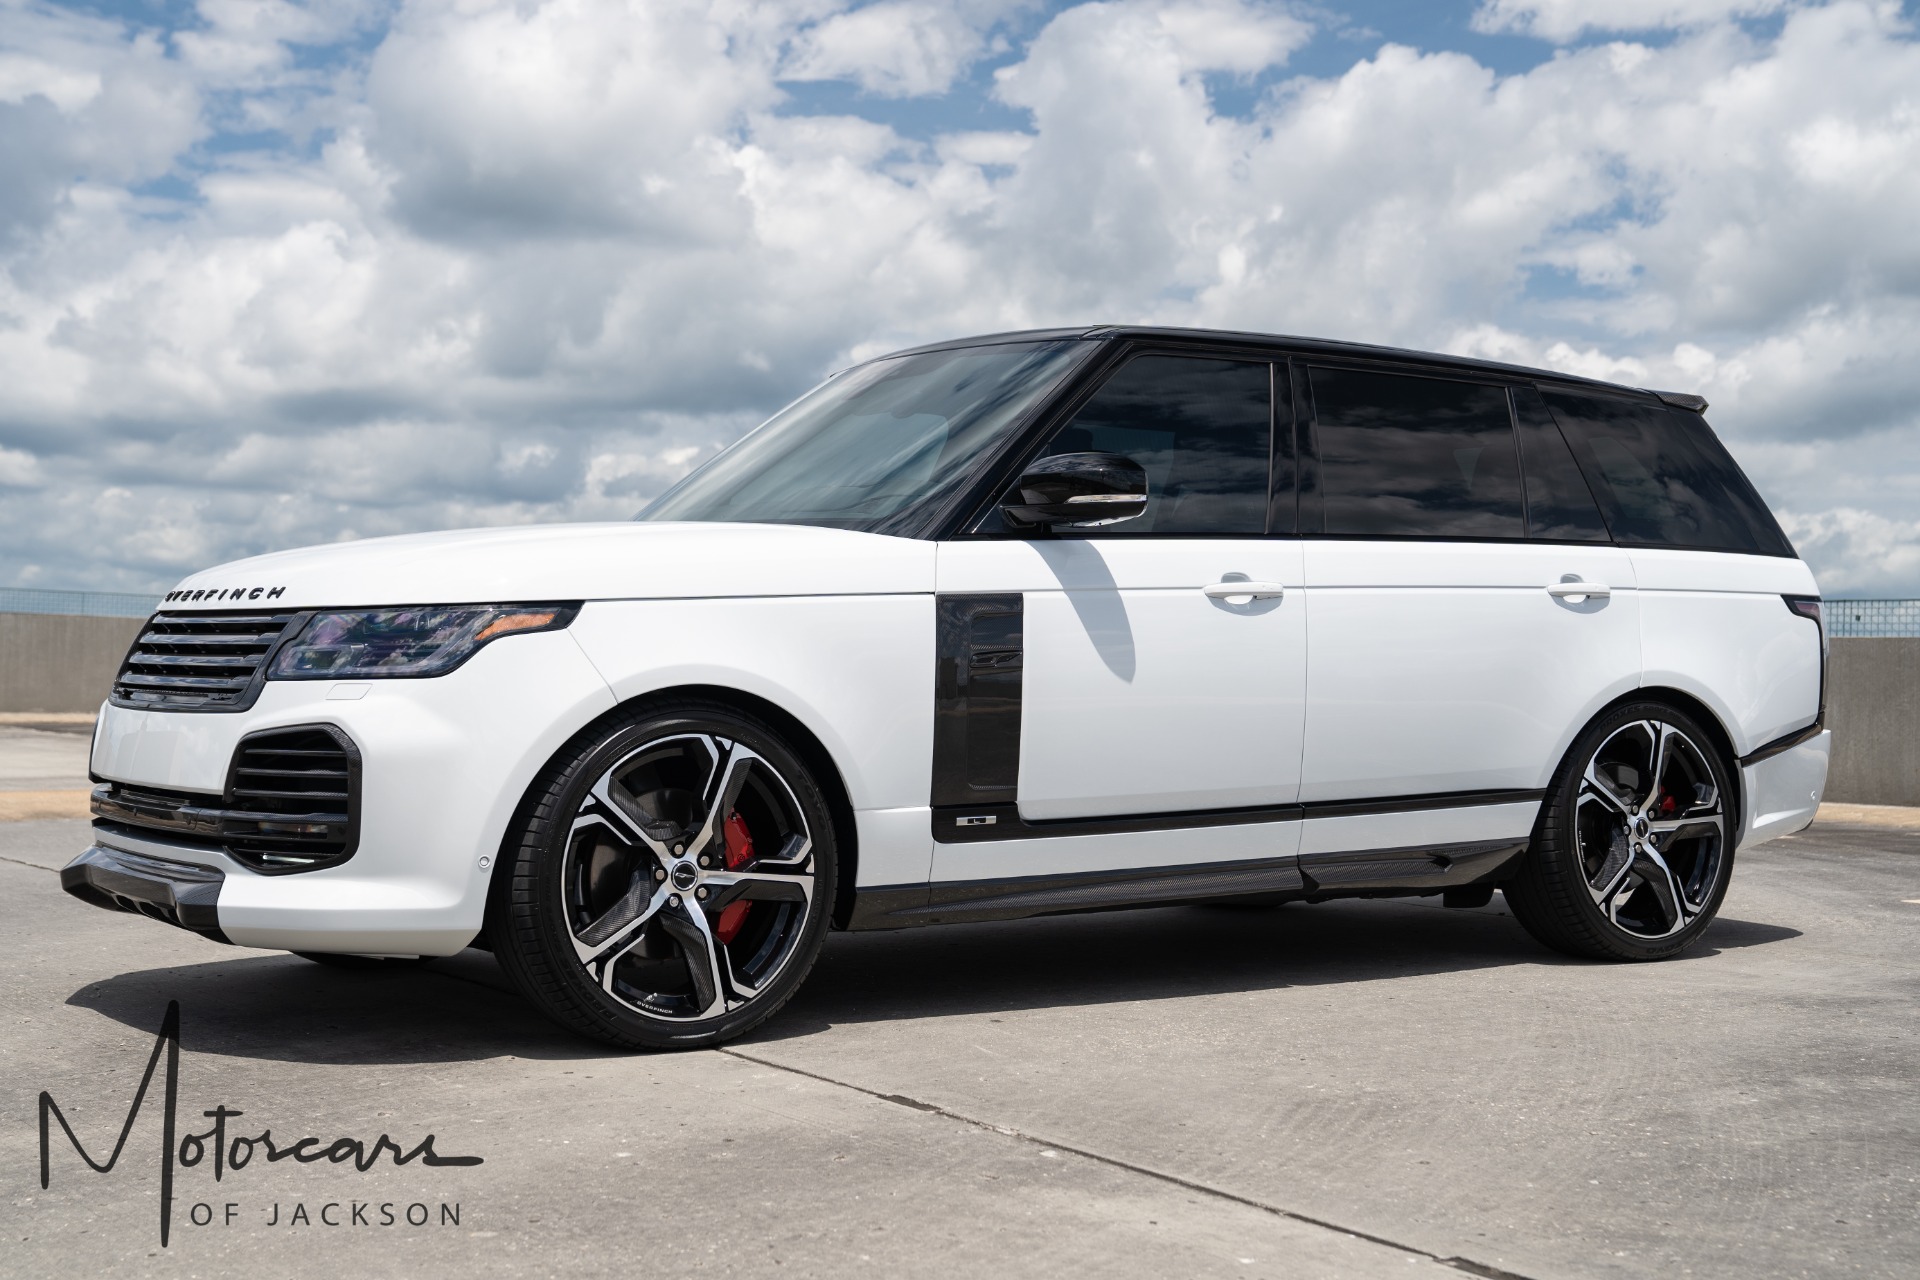 Used-2021-Land-Rover-Range-Rover-OVERFINCH-LWB-V8-Supercharged-for-sale-Jackson-MS